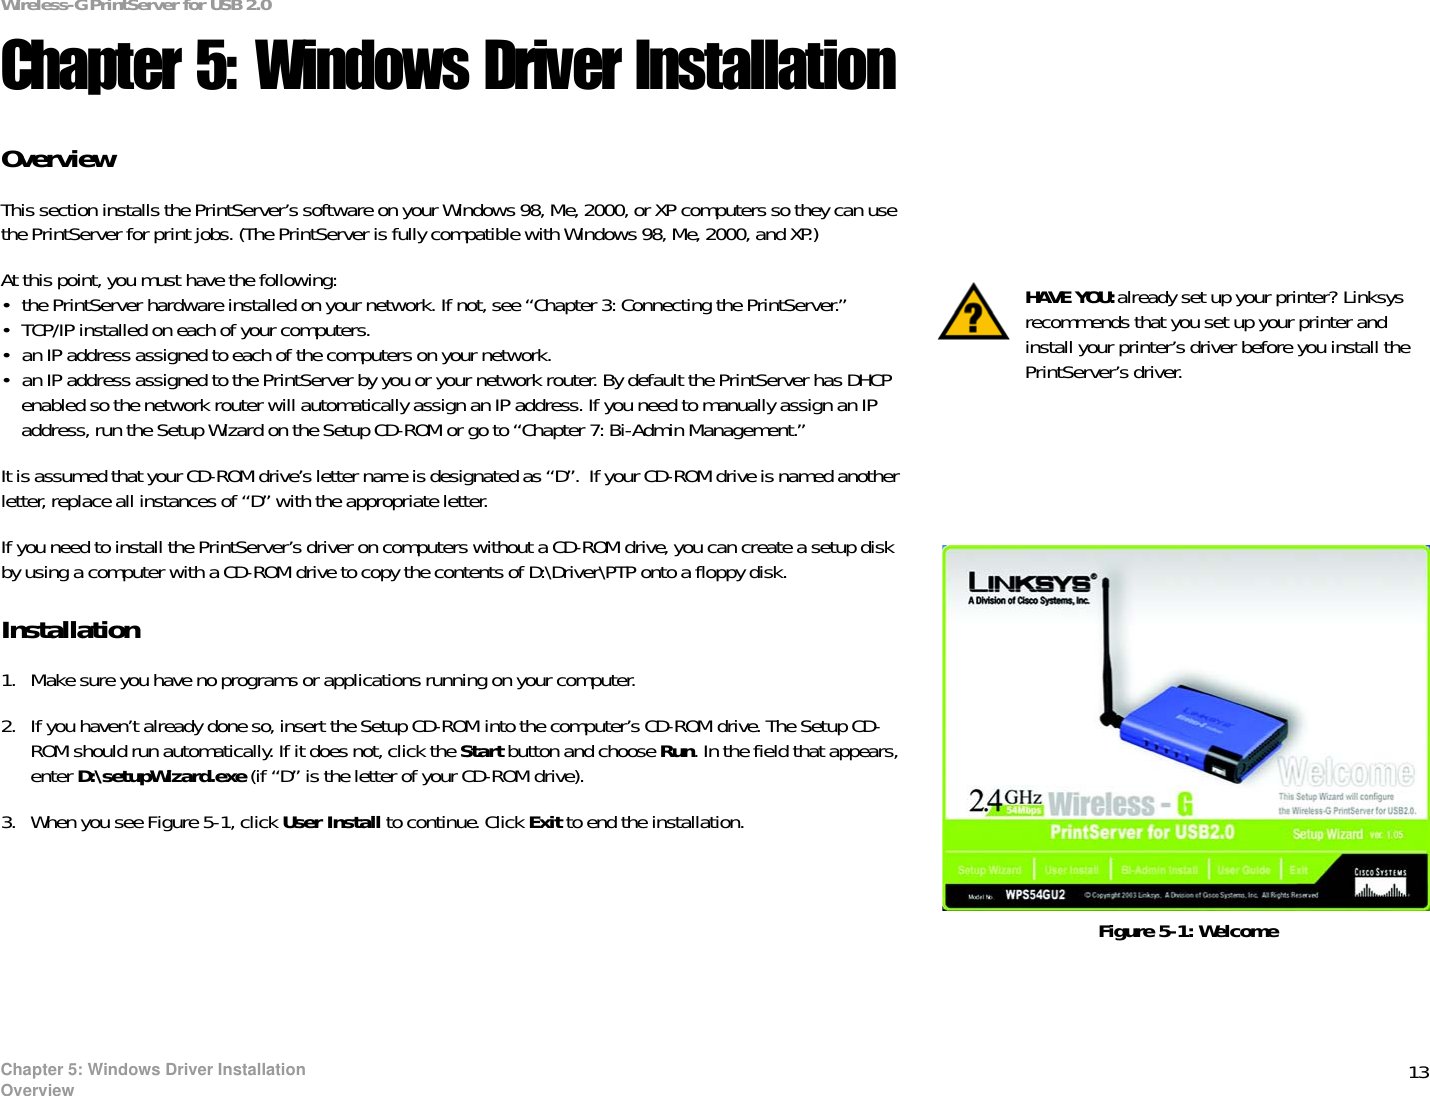 13Chapter 5: Windows Driver InstallationOverviewWireless-G PrintServer for USB 2.0Chapter 5: Windows Driver InstallationOverviewThis section installs the PrintServer’s software on your Windows 98, Me, 2000, or XP computers so they can use the PrintServer for print jobs. (The PrintServer is fully compatible with Windows 98, Me, 2000, and XP.)At this point, you must have the following: • the PrintServer hardware installed on your network. If not, see “Chapter 3: Connecting the PrintServer.”• TCP/IP installed on each of your computers. • an IP address assigned to each of the computers on your network.• an IP address assigned to the PrintServer by you or your network router. By default the PrintServer has DHCP enabled so the network router will automatically assign an IP address. If you need to manually assign an IP address, run the Setup Wizard on the Setup CD-ROM or go to “Chapter 7: Bi-Admin Management.”It is assumed that your CD-ROM drive’s letter name is designated as “D”.  If your CD-ROM drive is named another letter, replace all instances of “D” with the appropriate letter.If you need to install the PrintServer’s driver on computers without a CD-ROM drive, you can create a setup disk by using a computer with a CD-ROM drive to copy the contents of D:\Driver\PTP onto a floppy disk. Installation1. Make sure you have no programs or applications running on your computer.2. If you haven’t already done so, insert the Setup CD-ROM into the computer’s CD-ROM drive. The Setup CD-ROM should run automatically. If it does not, click the Start button and choose Run. In the field that appears, enter D:\setupWizard.exe (if “D” is the letter of your CD-ROM drive).3. When you see Figure 5-1, click User Install to continue. Click Exit to end the installation. Figure 5-1: WelcomeHAVE YOU:already set up your printer? Linksys recommends that you set up your printer and install your printer’s driver before you install the PrintServer’s driver.